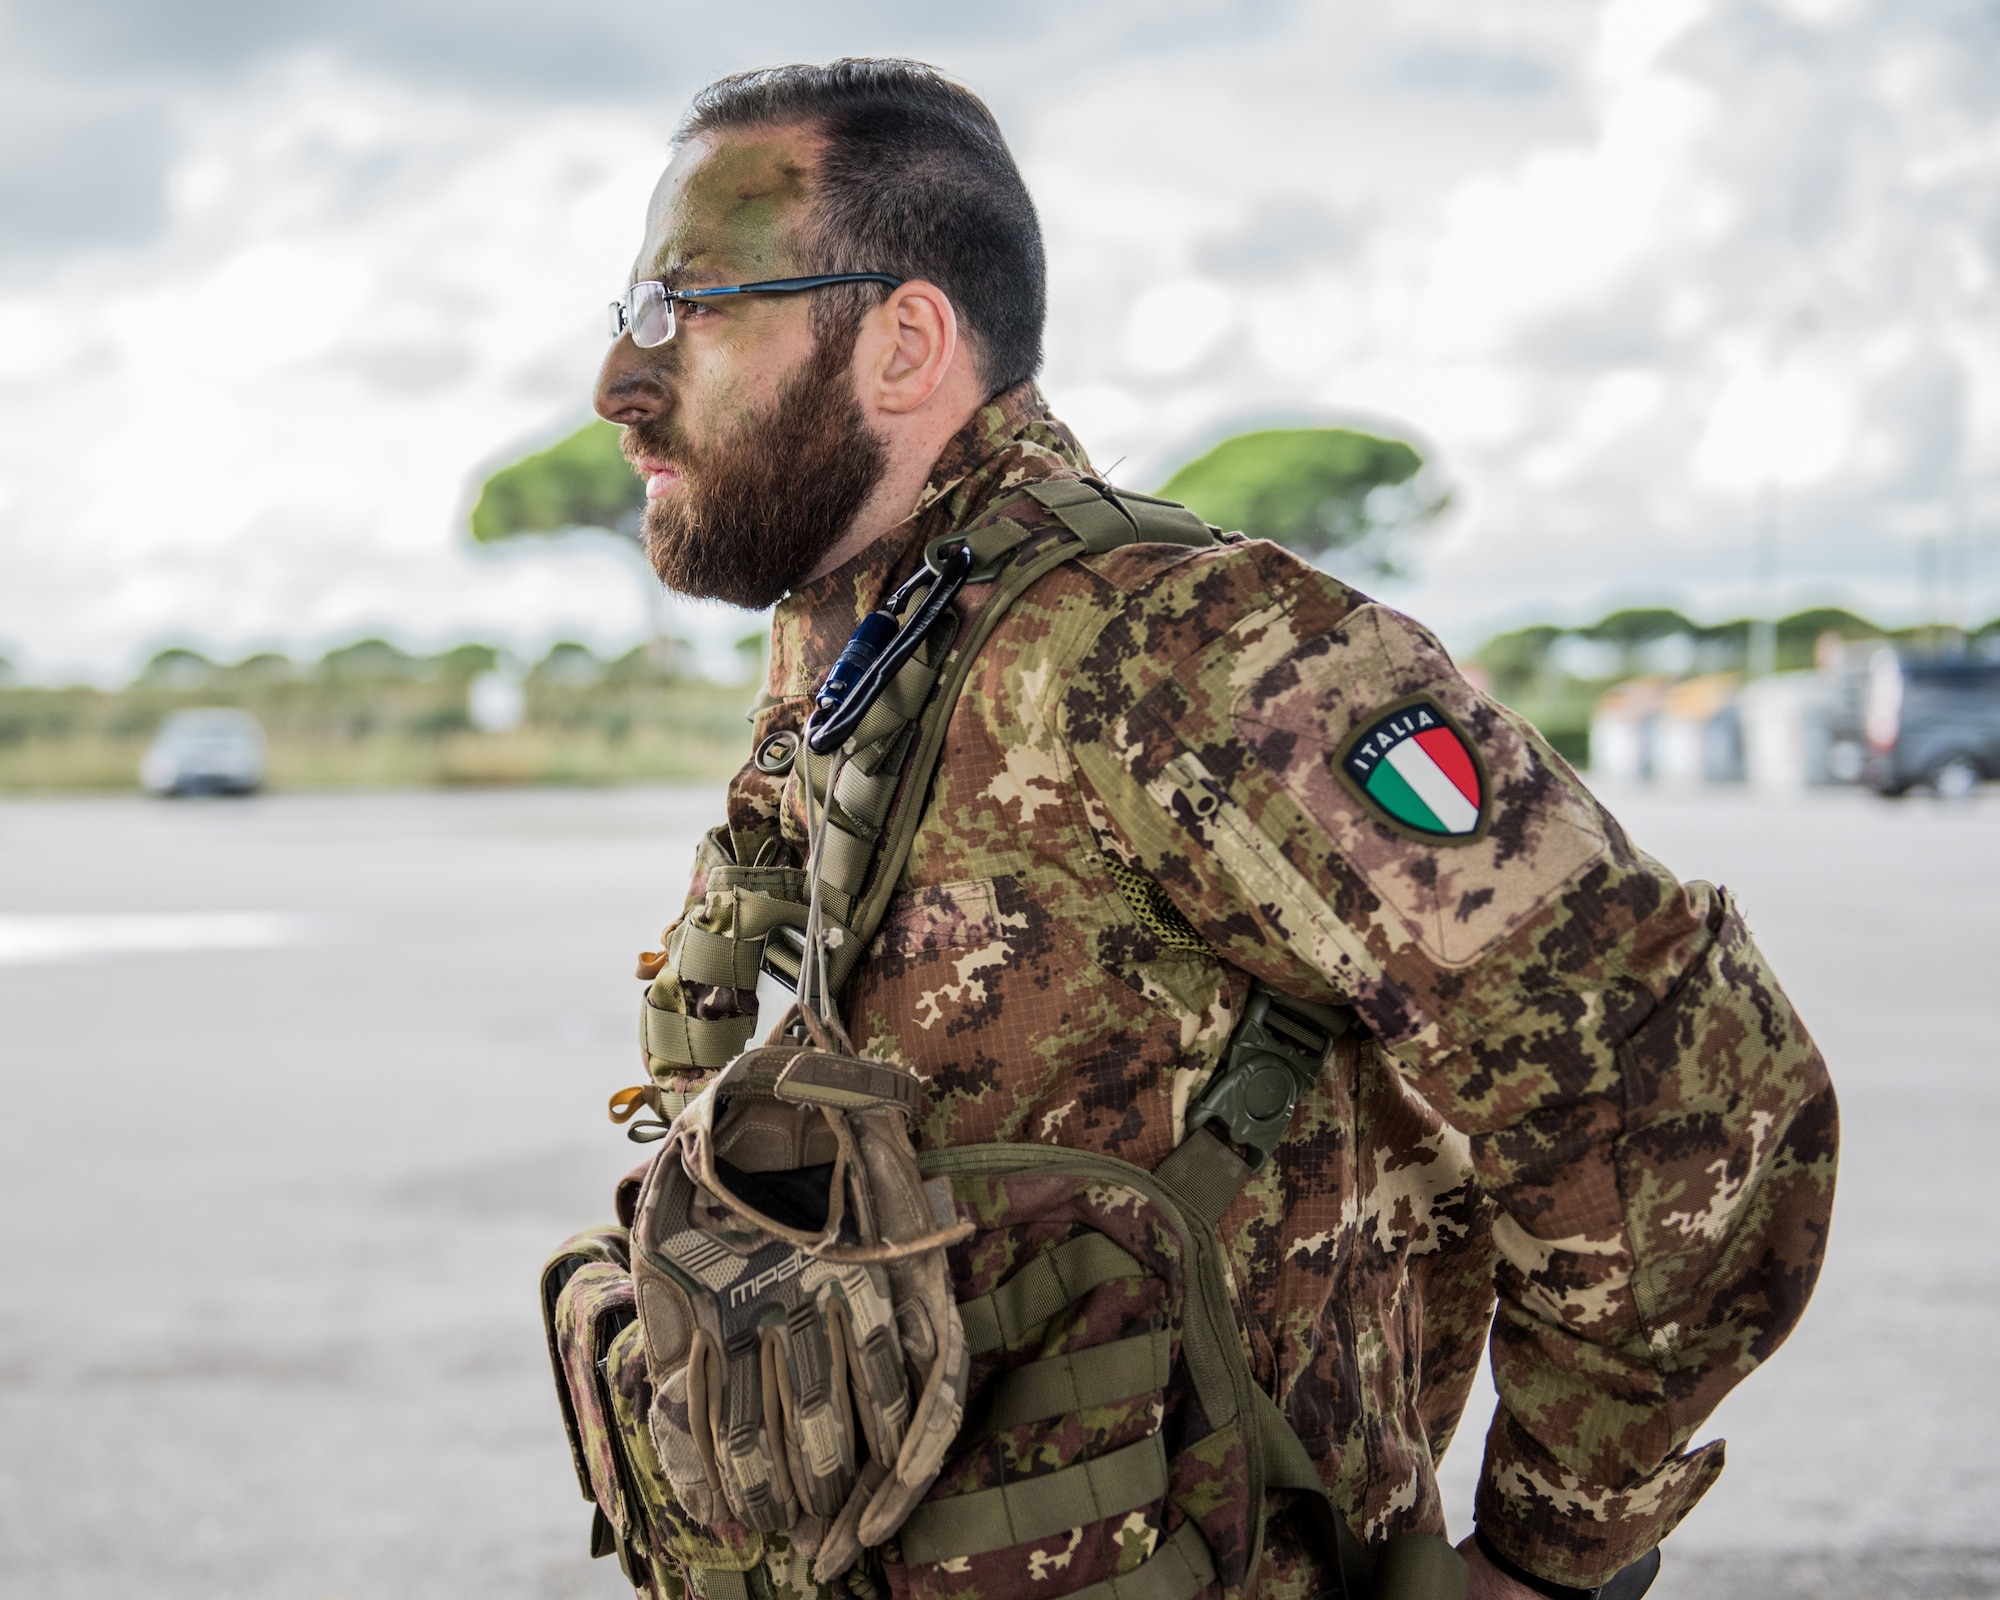 A member of the Italian Folgore, an airborne paratrooper brigade from the Italian Army, prepares to execute an airdrop mission alongside members of the Kentucky Air National Guard’s 123rd Airlift Wing in Pisa, Italy, Nov. 7, 2019. The mission was part of Mangusta 19, a bi-lateral exercise designed to promote readiness and interoperability among NATO allies. (U.S. Air National Guard photo by Senior Airman Chloe Ochs)